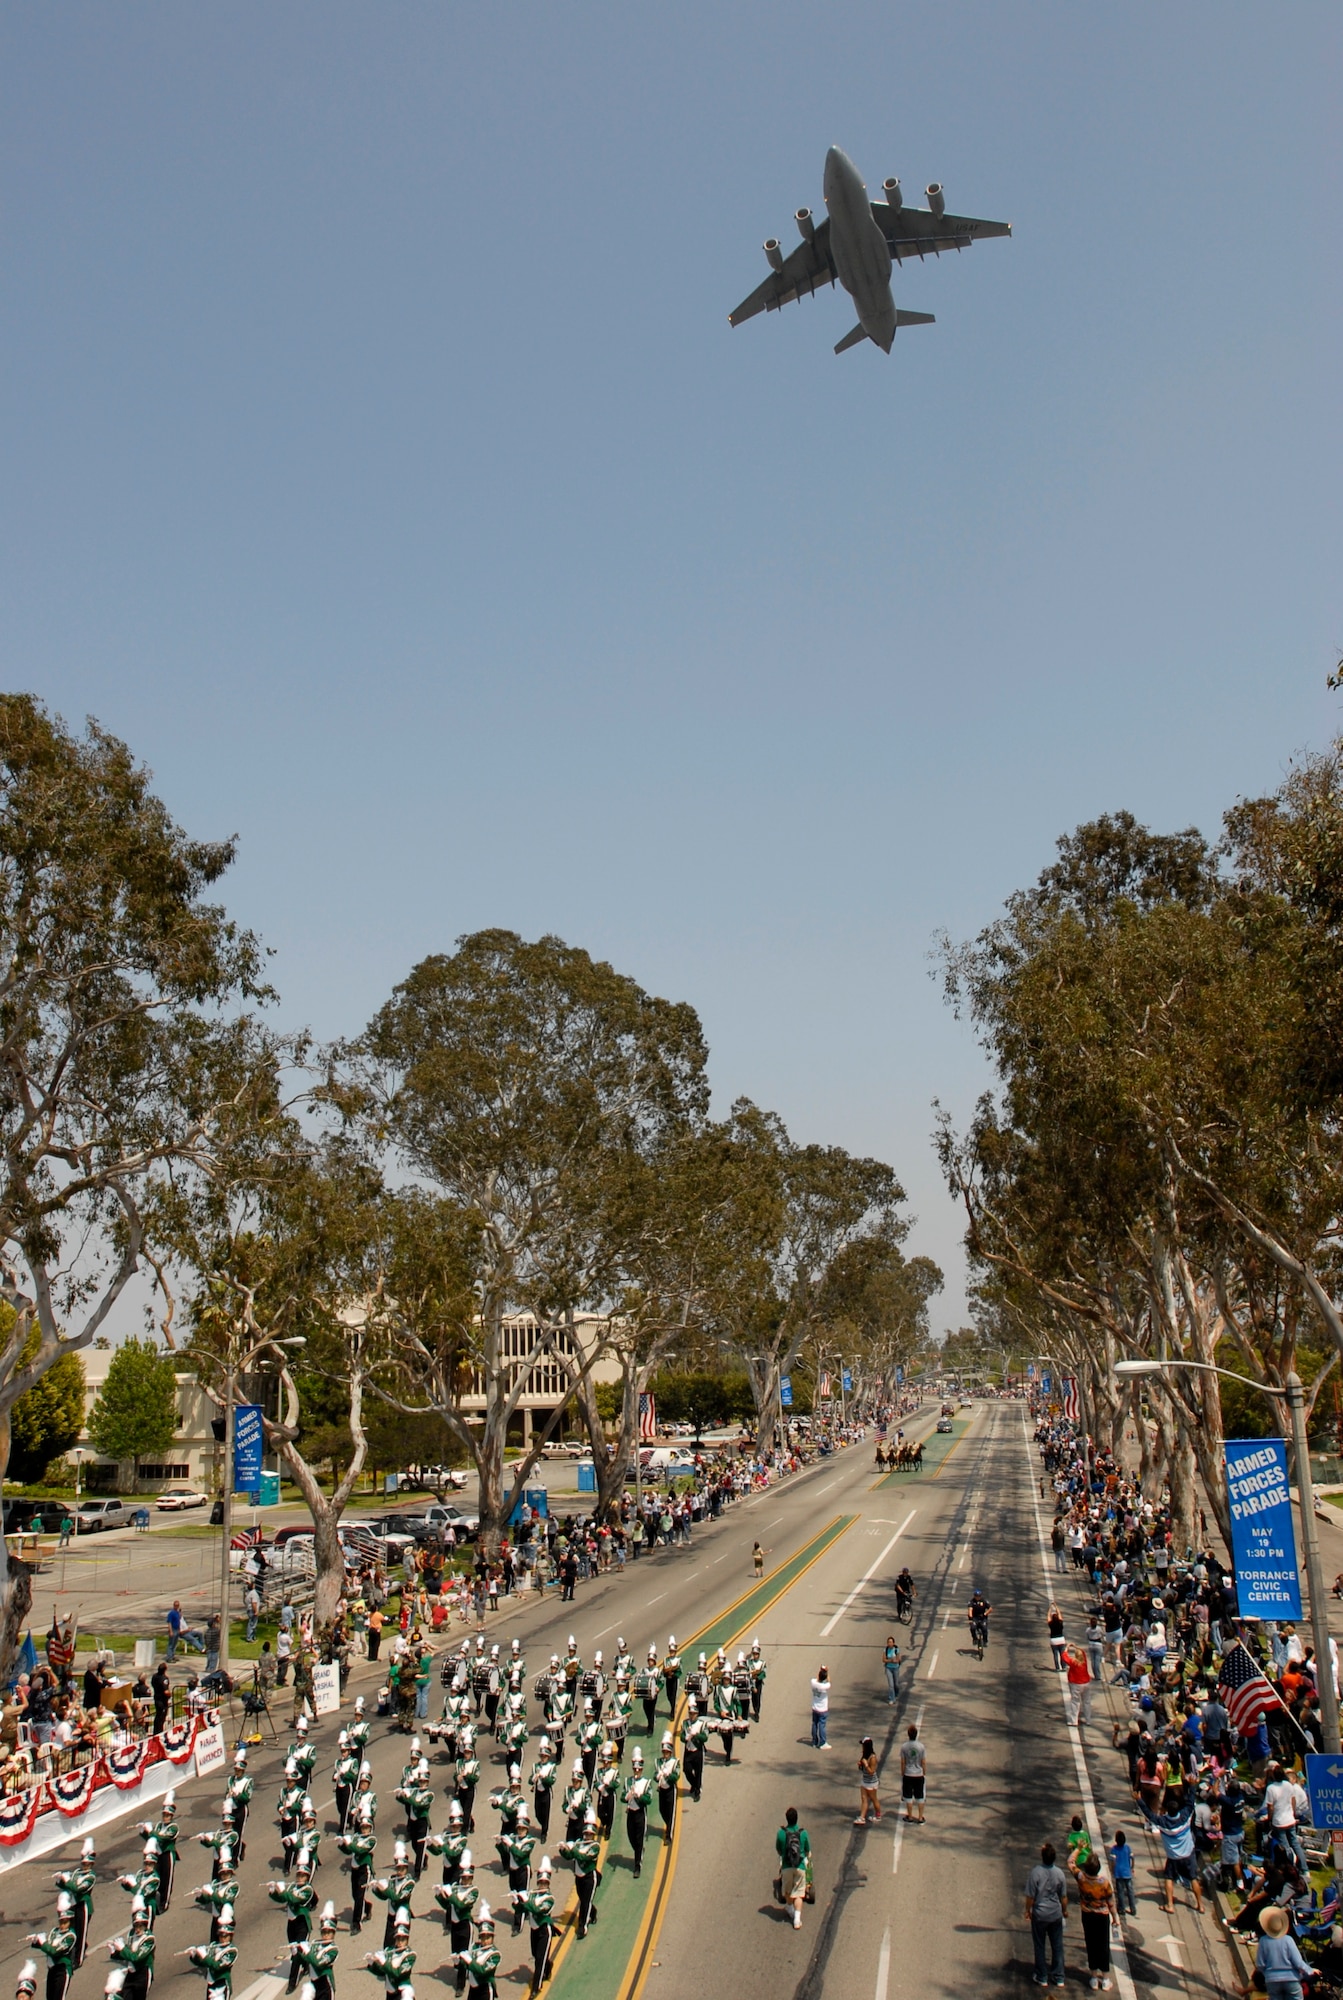 An Air Force C-17 flys over the parade route during the 2007 Torrance Armed Forces Day Parade, May 19. Gen. Kevin Chilton, Air Force Space Command commander, served as the Grand Marshal for the parade. A Los Angeles AFB honor guard led the way as Los Angeles, Edwards, and Vandenberg Air Force Bases and March Air Reserve Base marched passed the crowds with a total of more than 300 airmen participating. 
